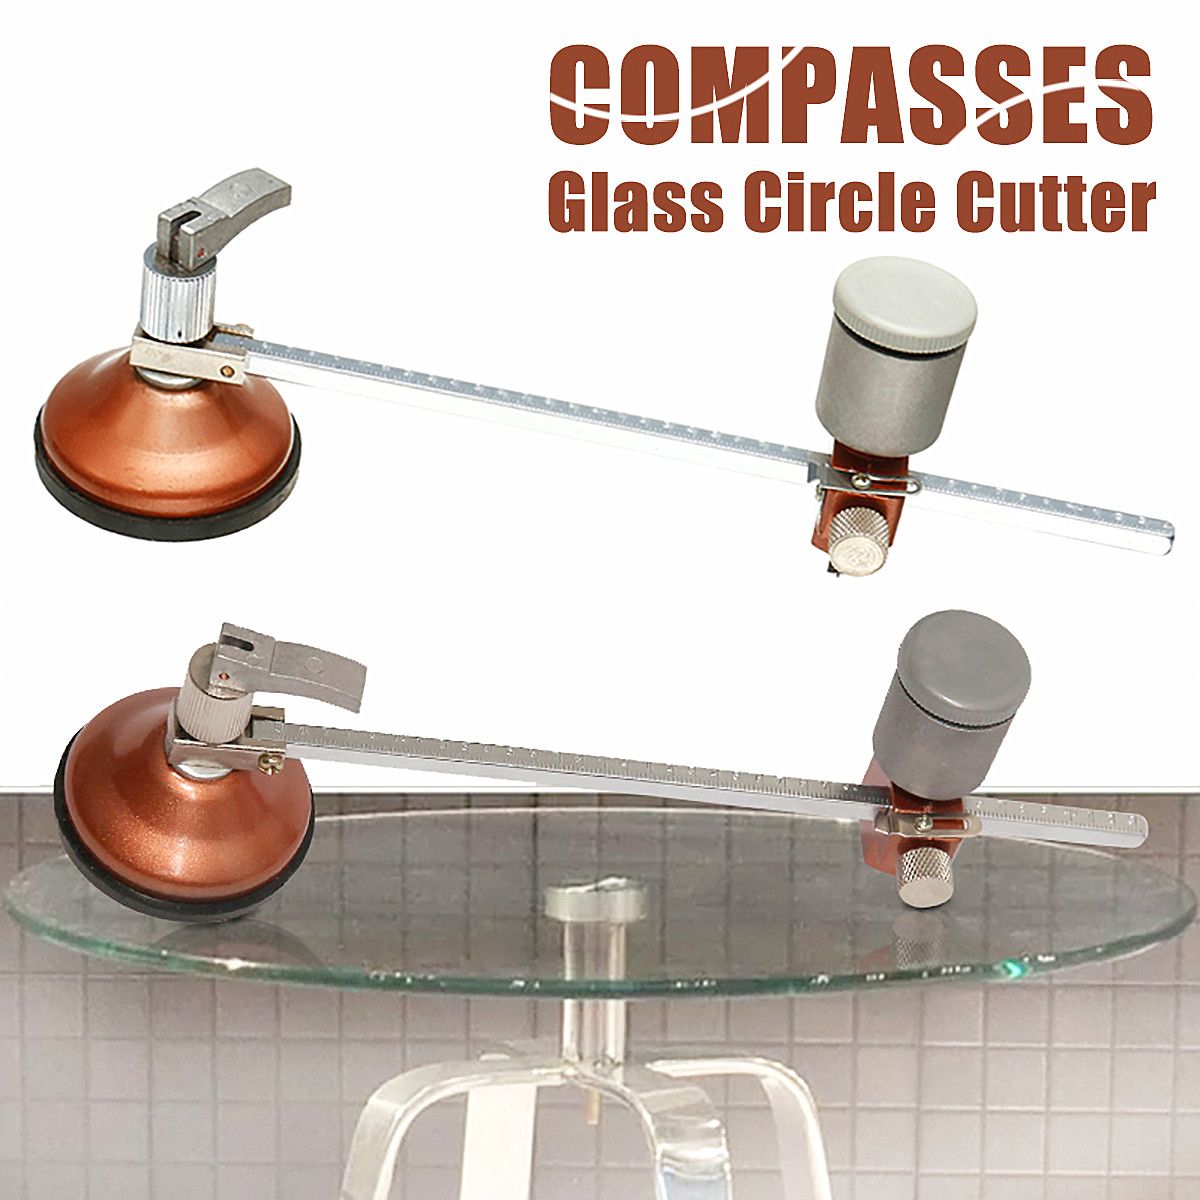 Circular-Glass-Cutter-with-Round-Knob-Handle-Suction-Cup-Adjustable-Diamond-Glass-Cutter-Tool-Set-1348165